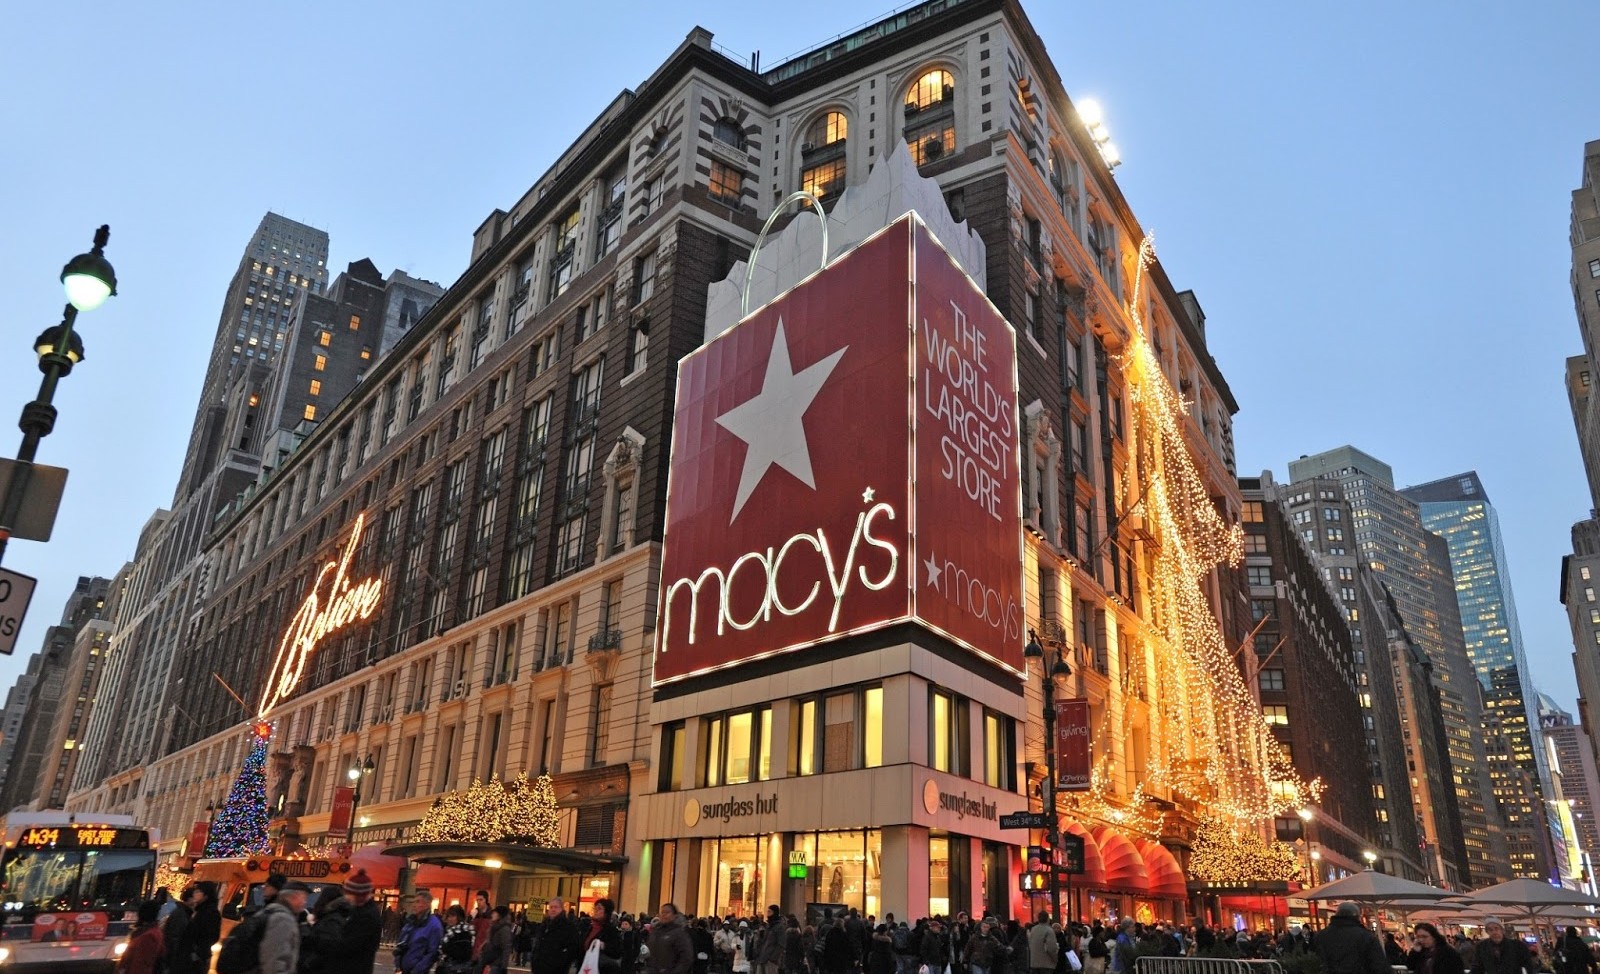 Macy’s madness: Here are 9 interesting facts about America’s favorite department store